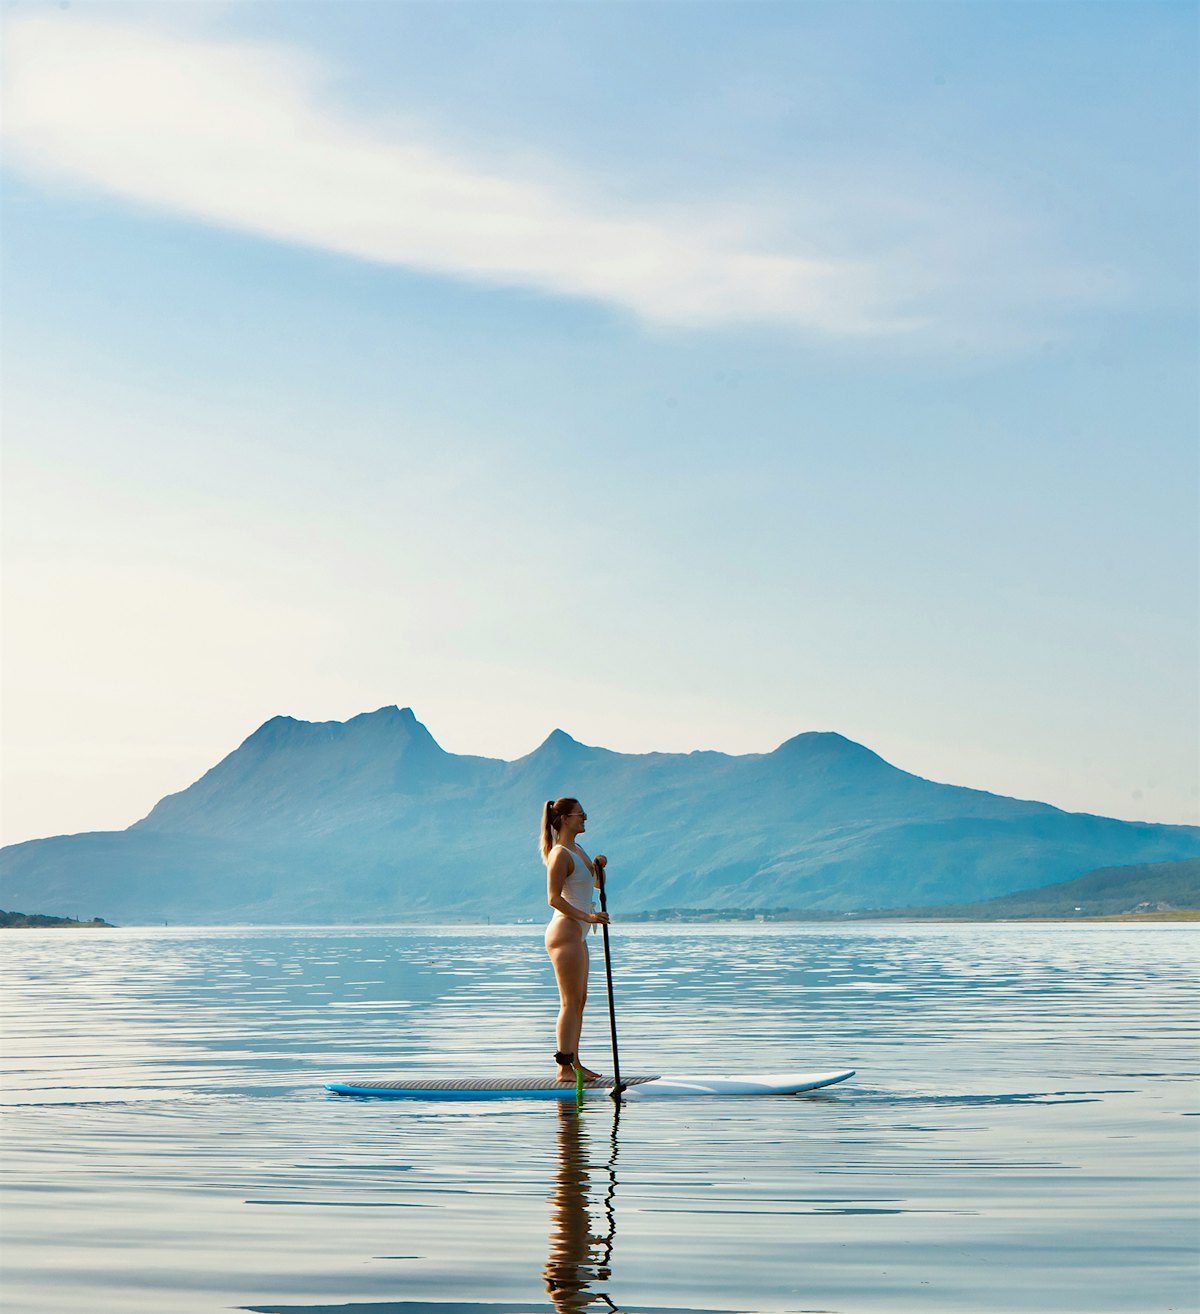 Girl stands upright on a SUP board with mountains in the background. Photo